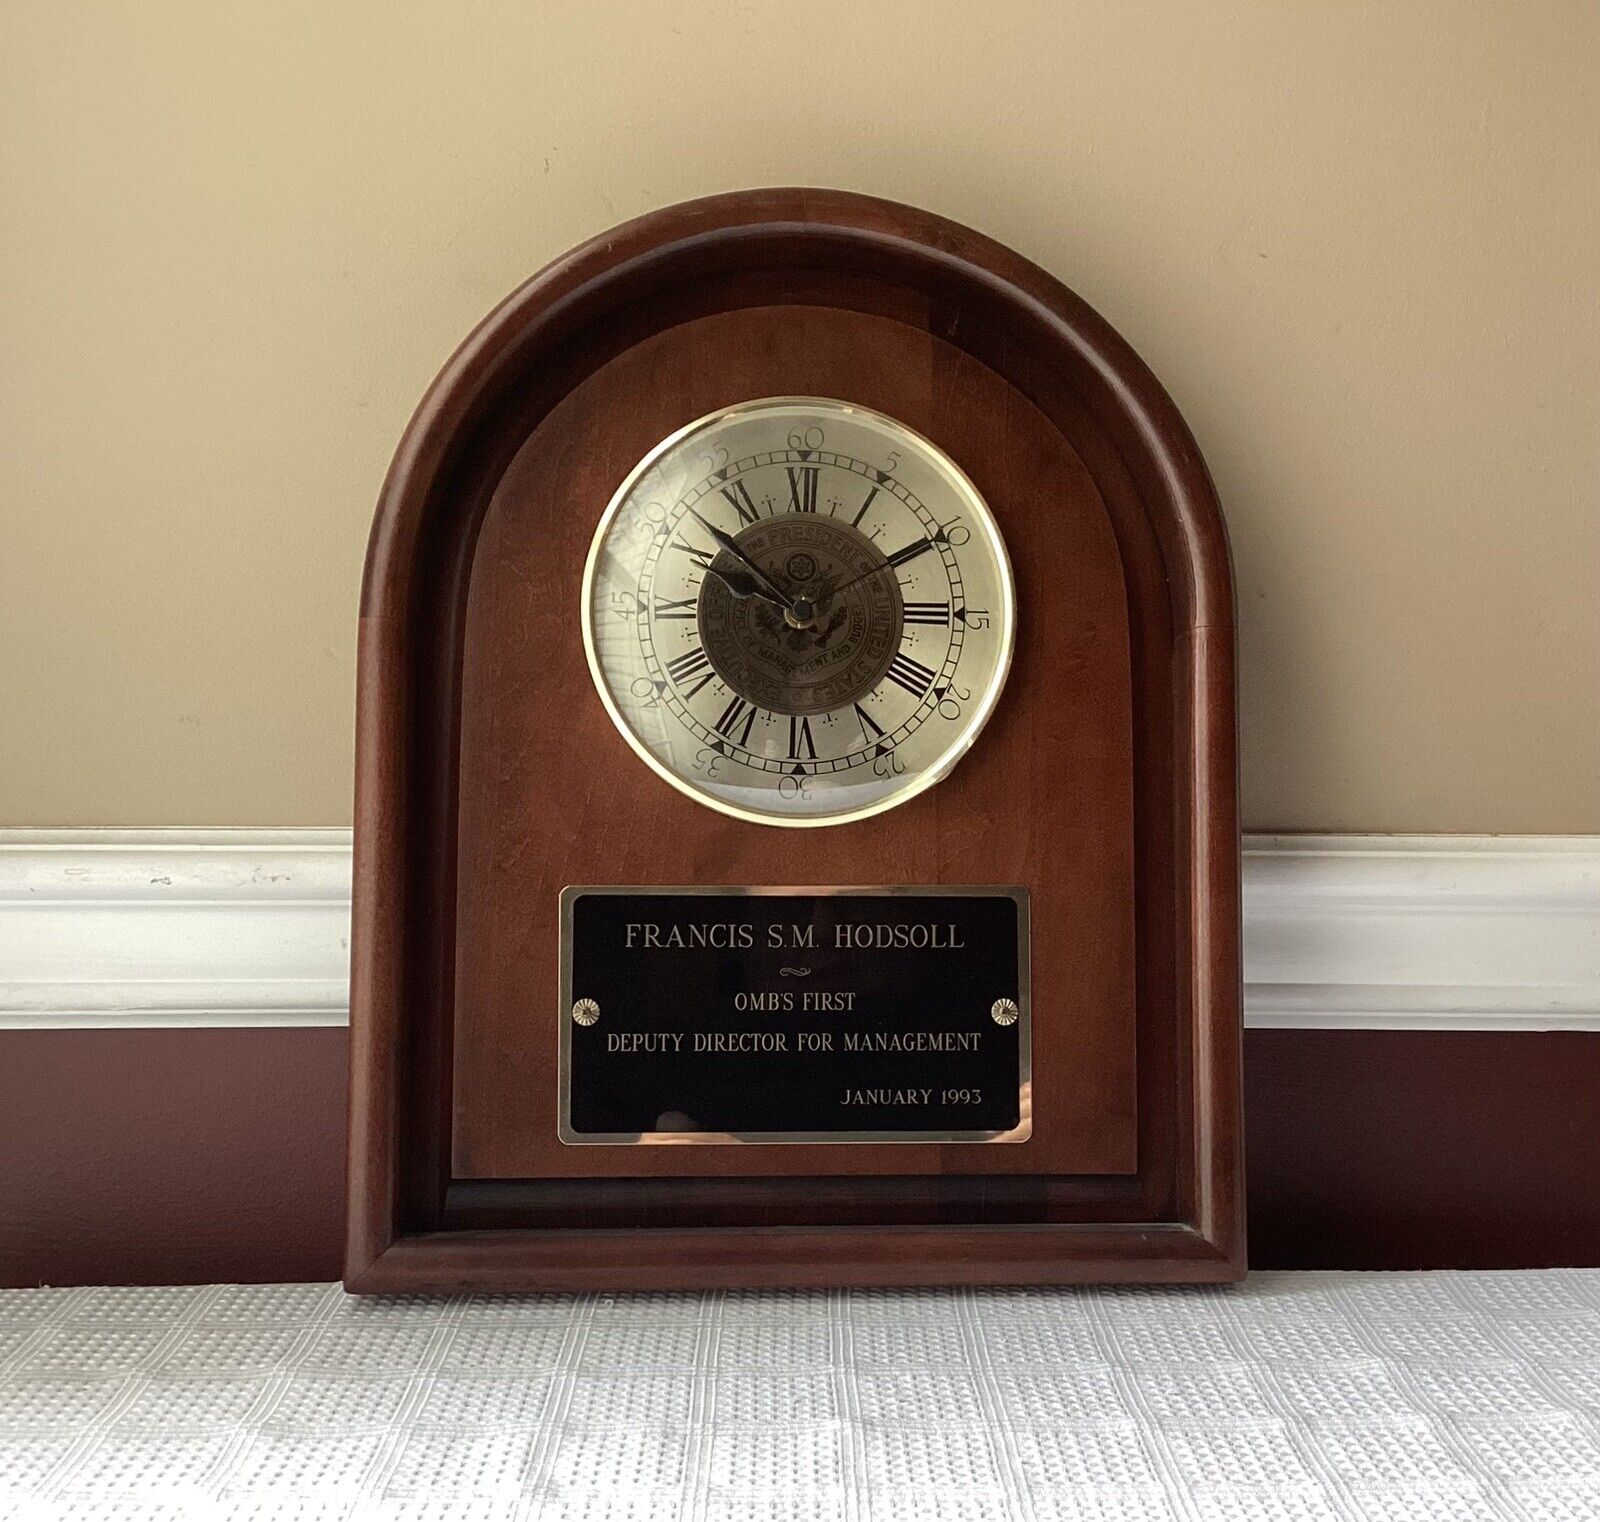 Executive Office Of The President Of The United States Emblem Clock Plaque Award